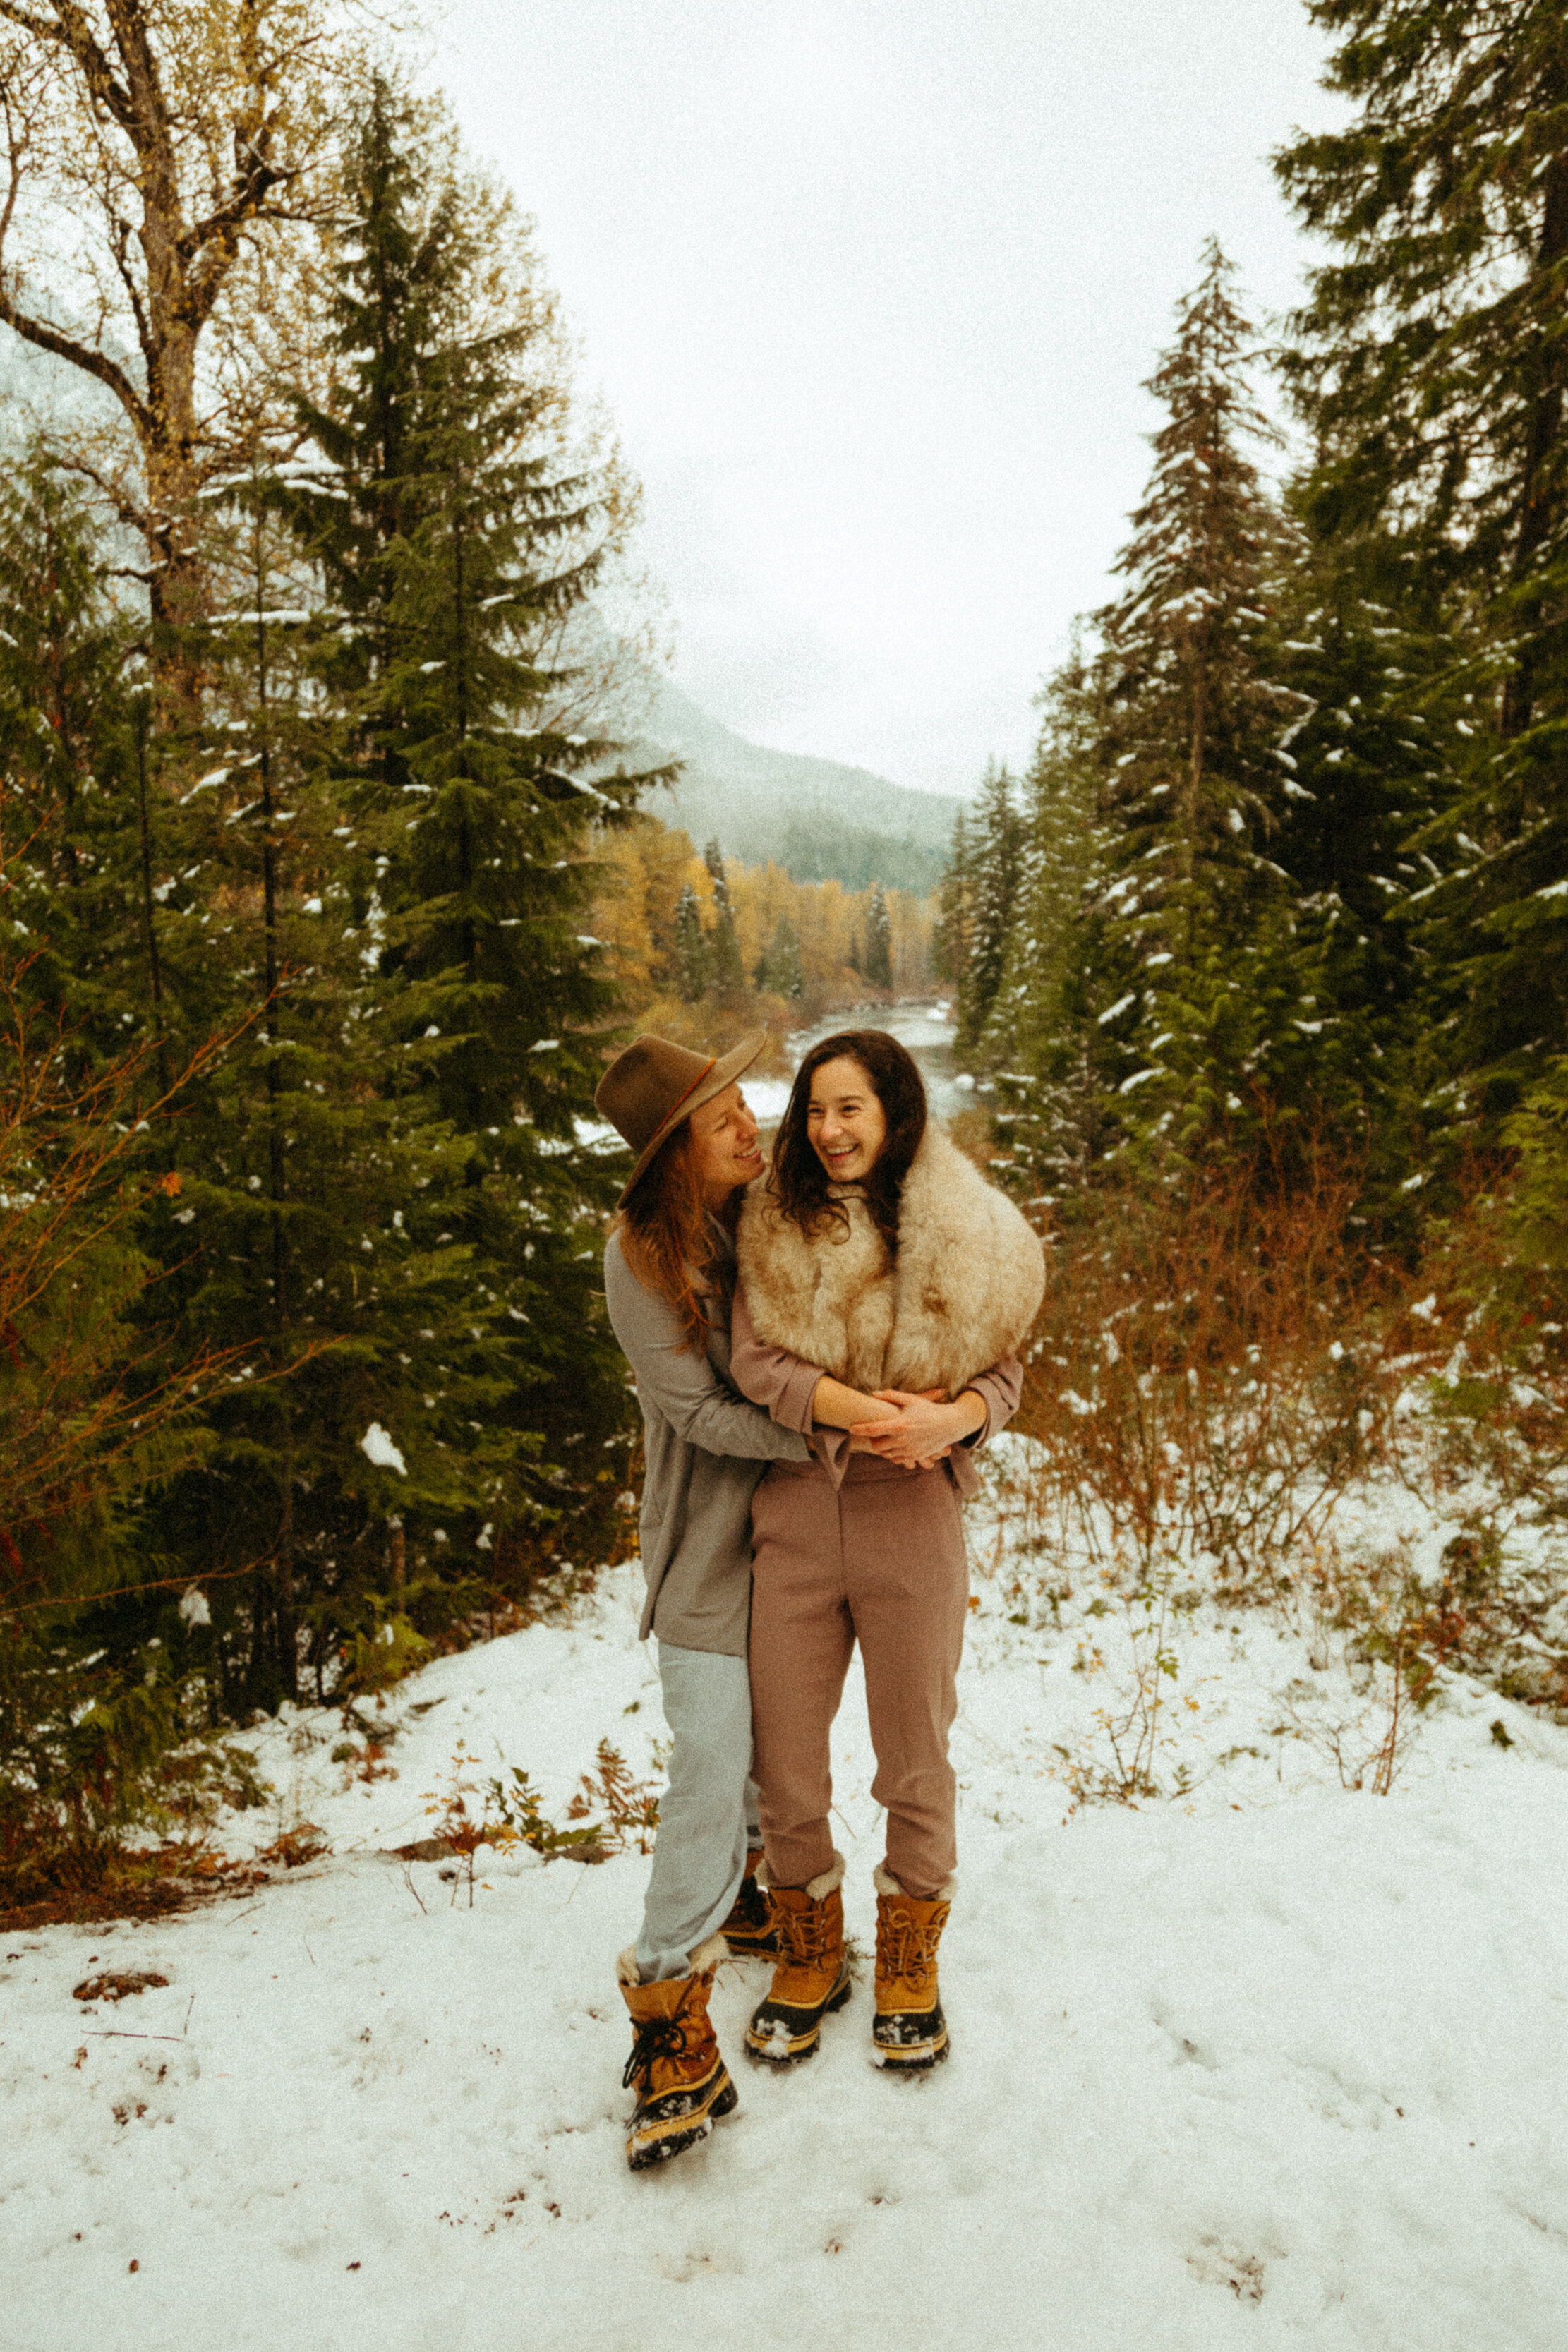 queer-gay-lesbian-trans-affirming-lgbtq-adventure-elopement-intimate-wedding-photographer-pnw-pacific-northwest-pnw-mountain-stream-forest-cowgay-tacoma-seattle-washington-portland-oregon-halle-roland-photography-non-binary-analog-film-artist-165-304.jpg